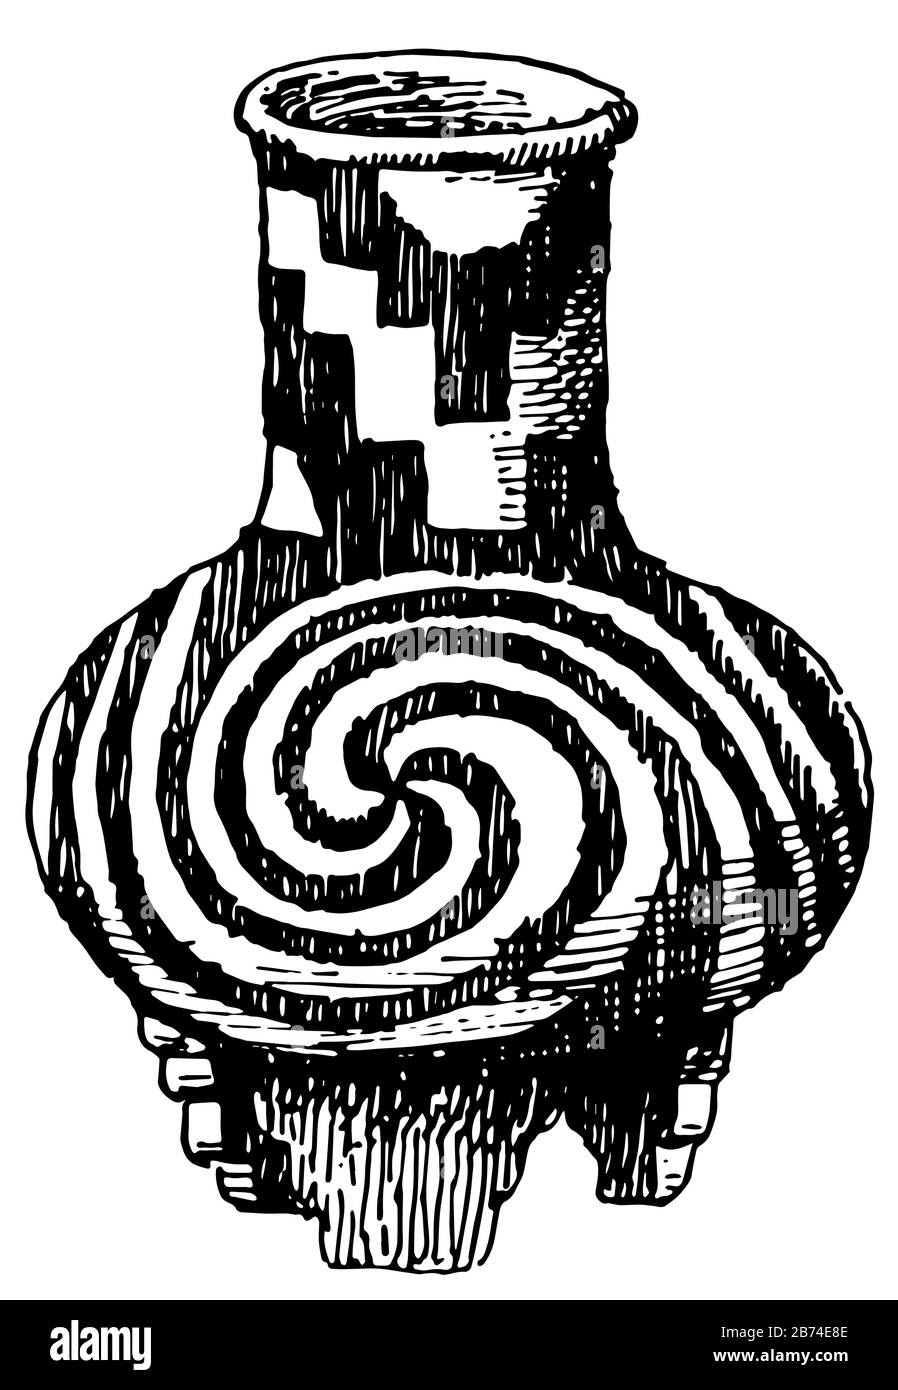 Mexican Jar with Spirals design sketched in the American Museum of Natural History in New York, it is a rigid and approximately cylindrical container Stock Vector